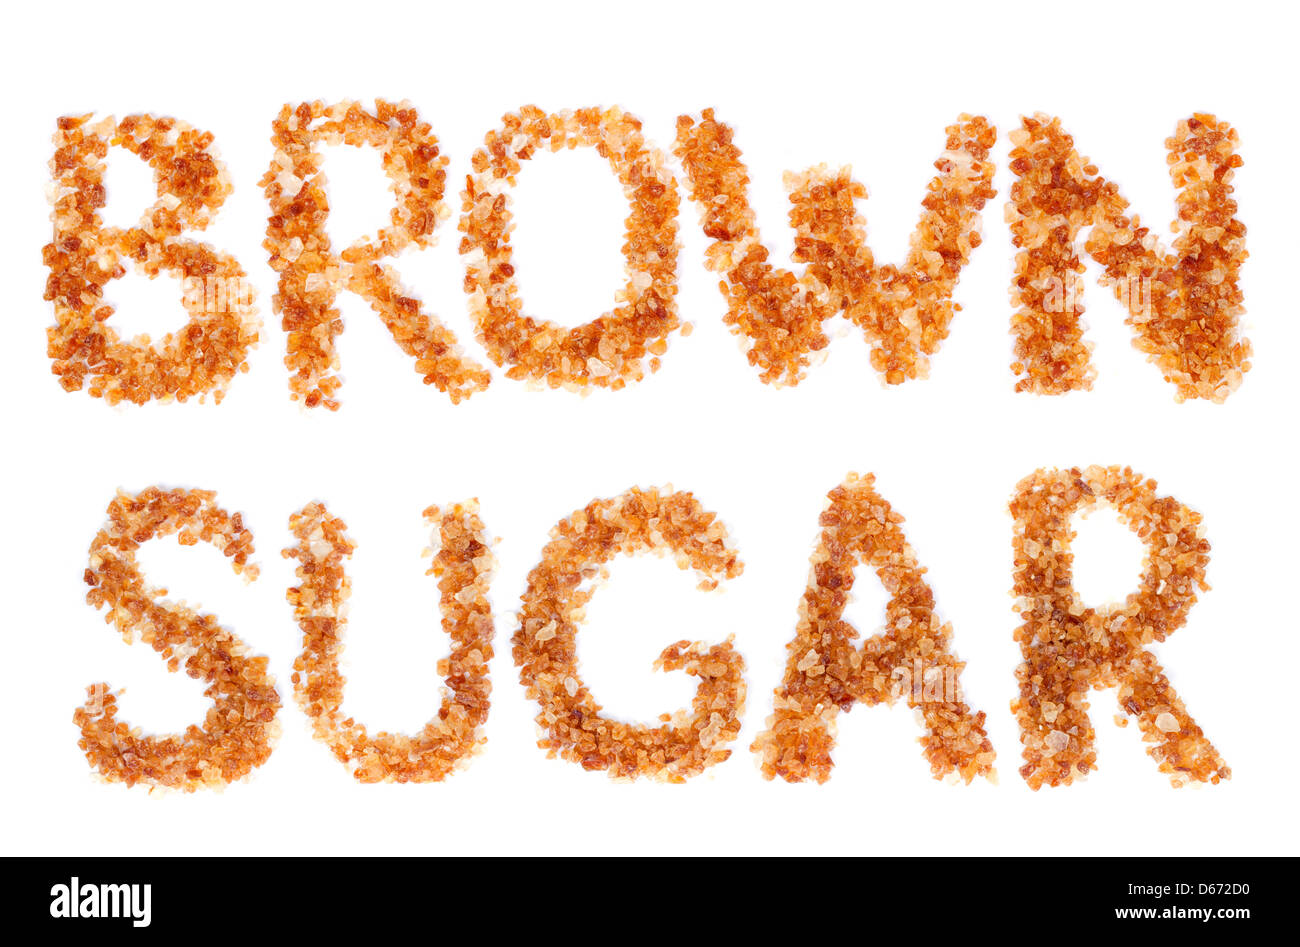 word BROWN SUGAR laid brown sugar. Isolate on white. Stock Photo